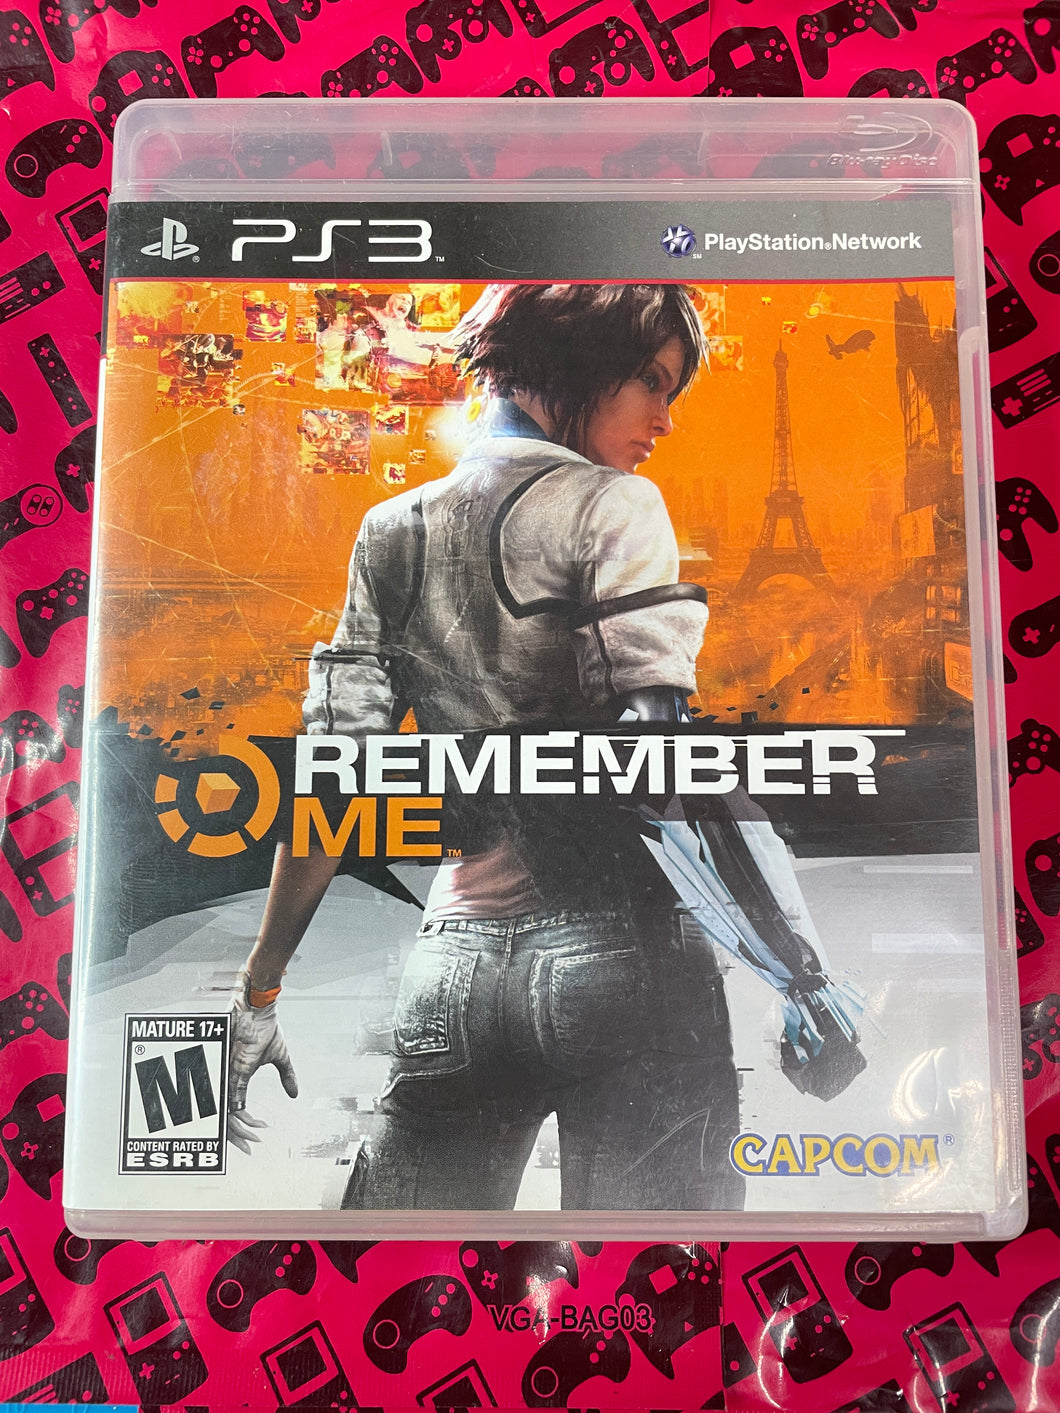 rolle Levere travl Remember Me Playstation 3 – Max Level Video Games